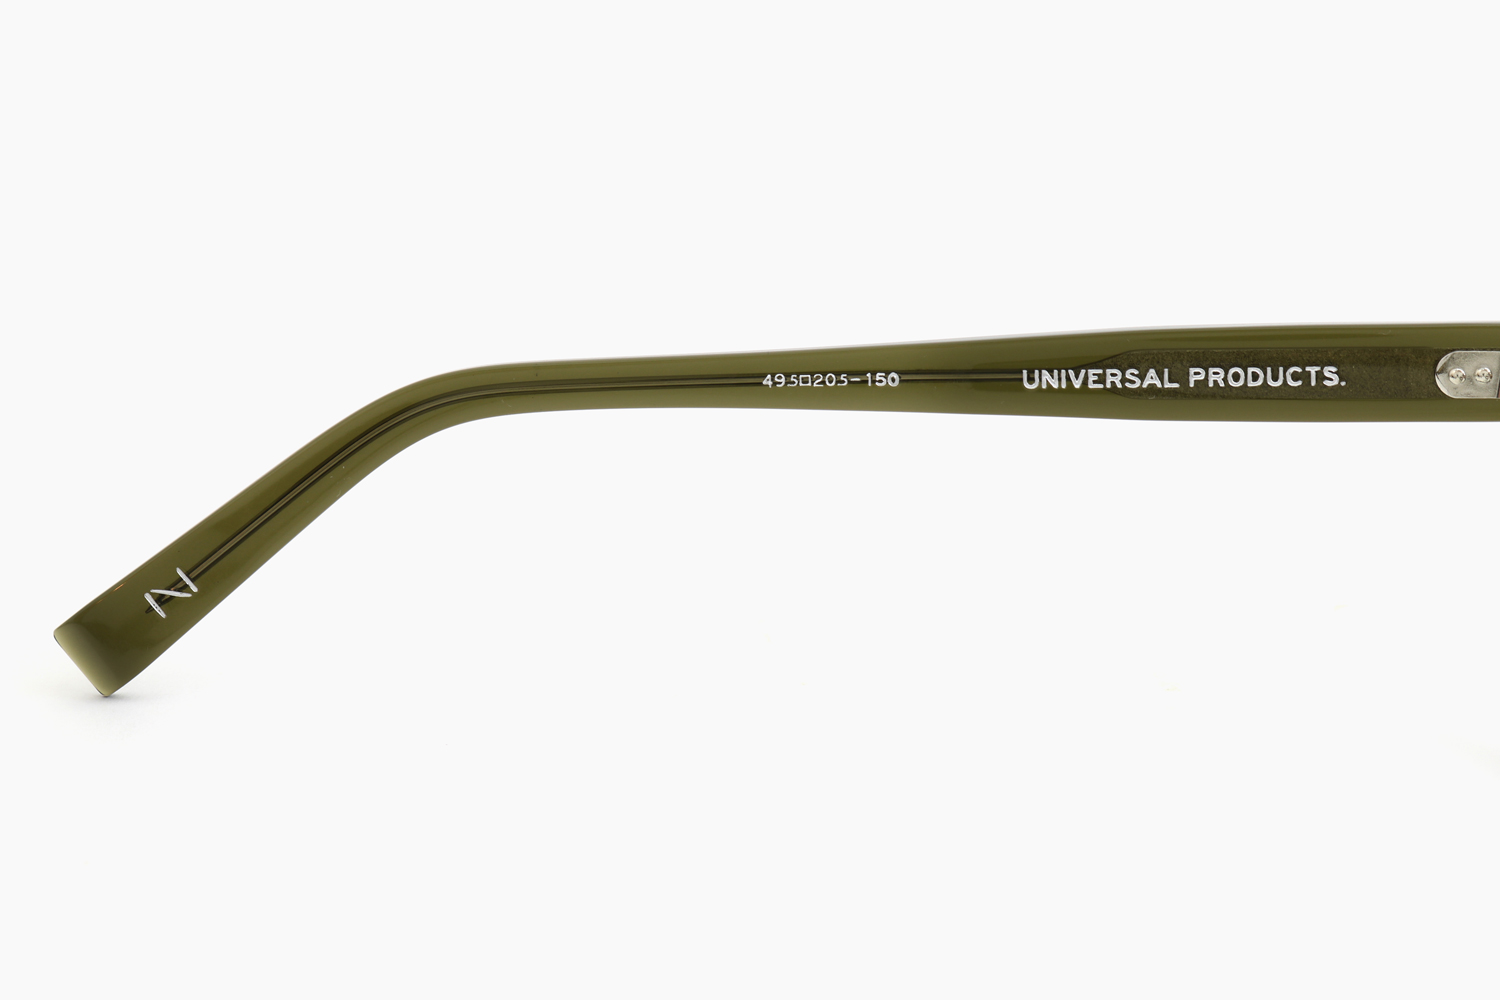 UNIVERSAL PRODUCTS. + Noritake x The PARKSIDE ROOM｜tpr-006 - KHAKI｜The PARKSIDE ROOM